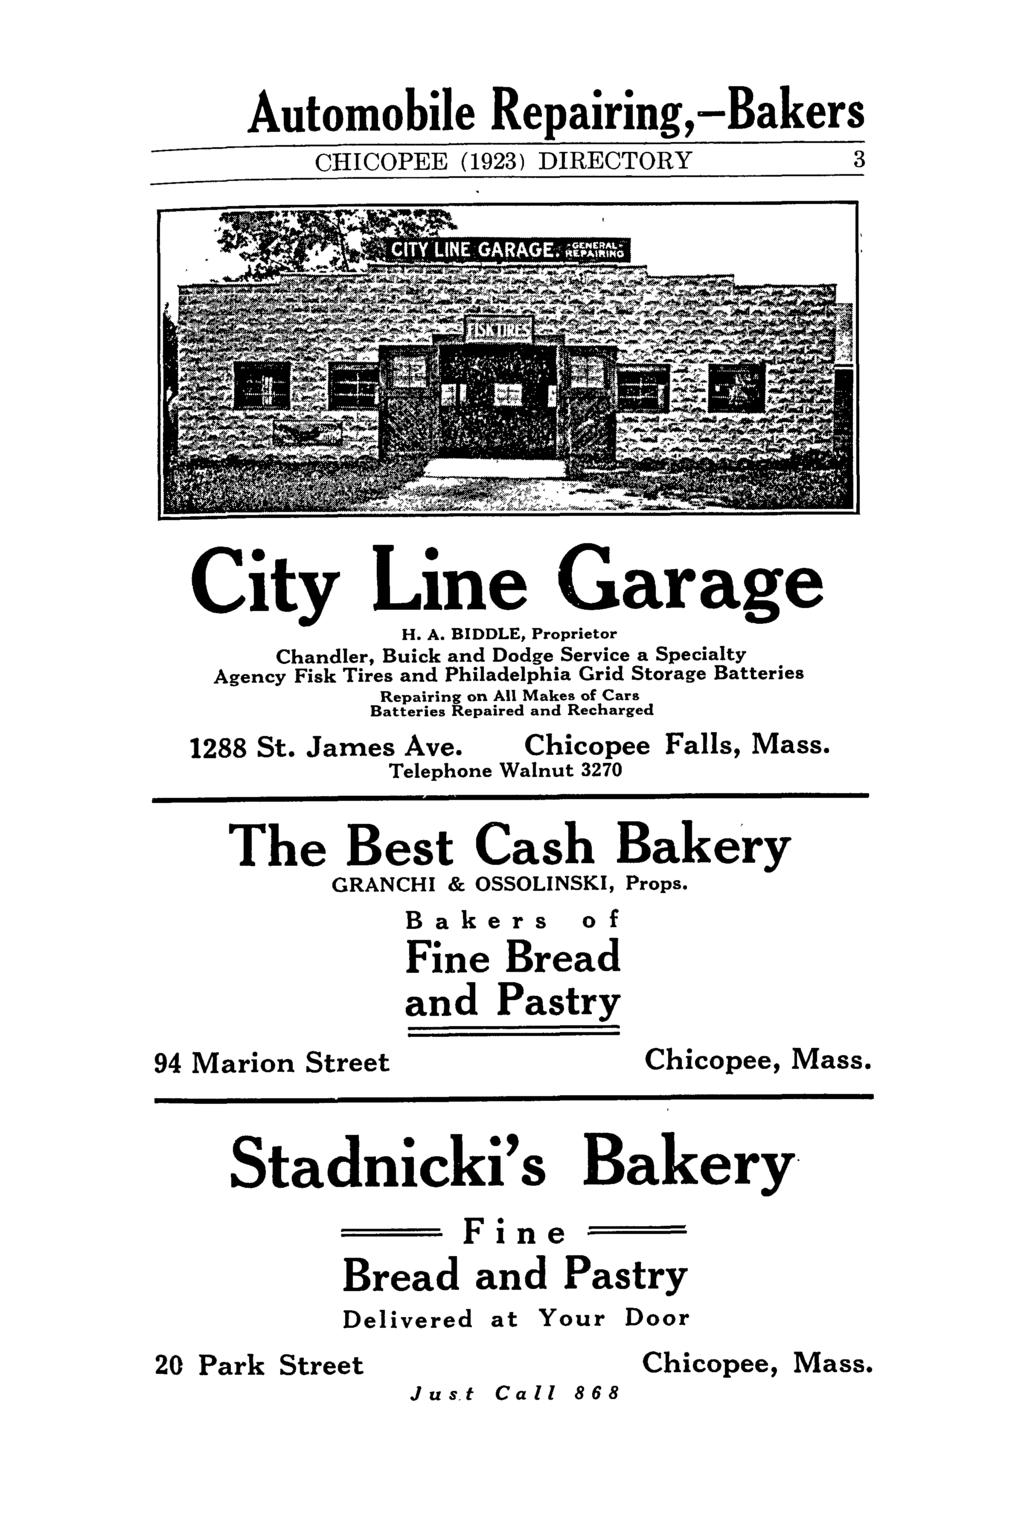 Automobile Repairing,-Bakers CHICOPEE (923) DIRECTORY 3 City Line Garage H. A.